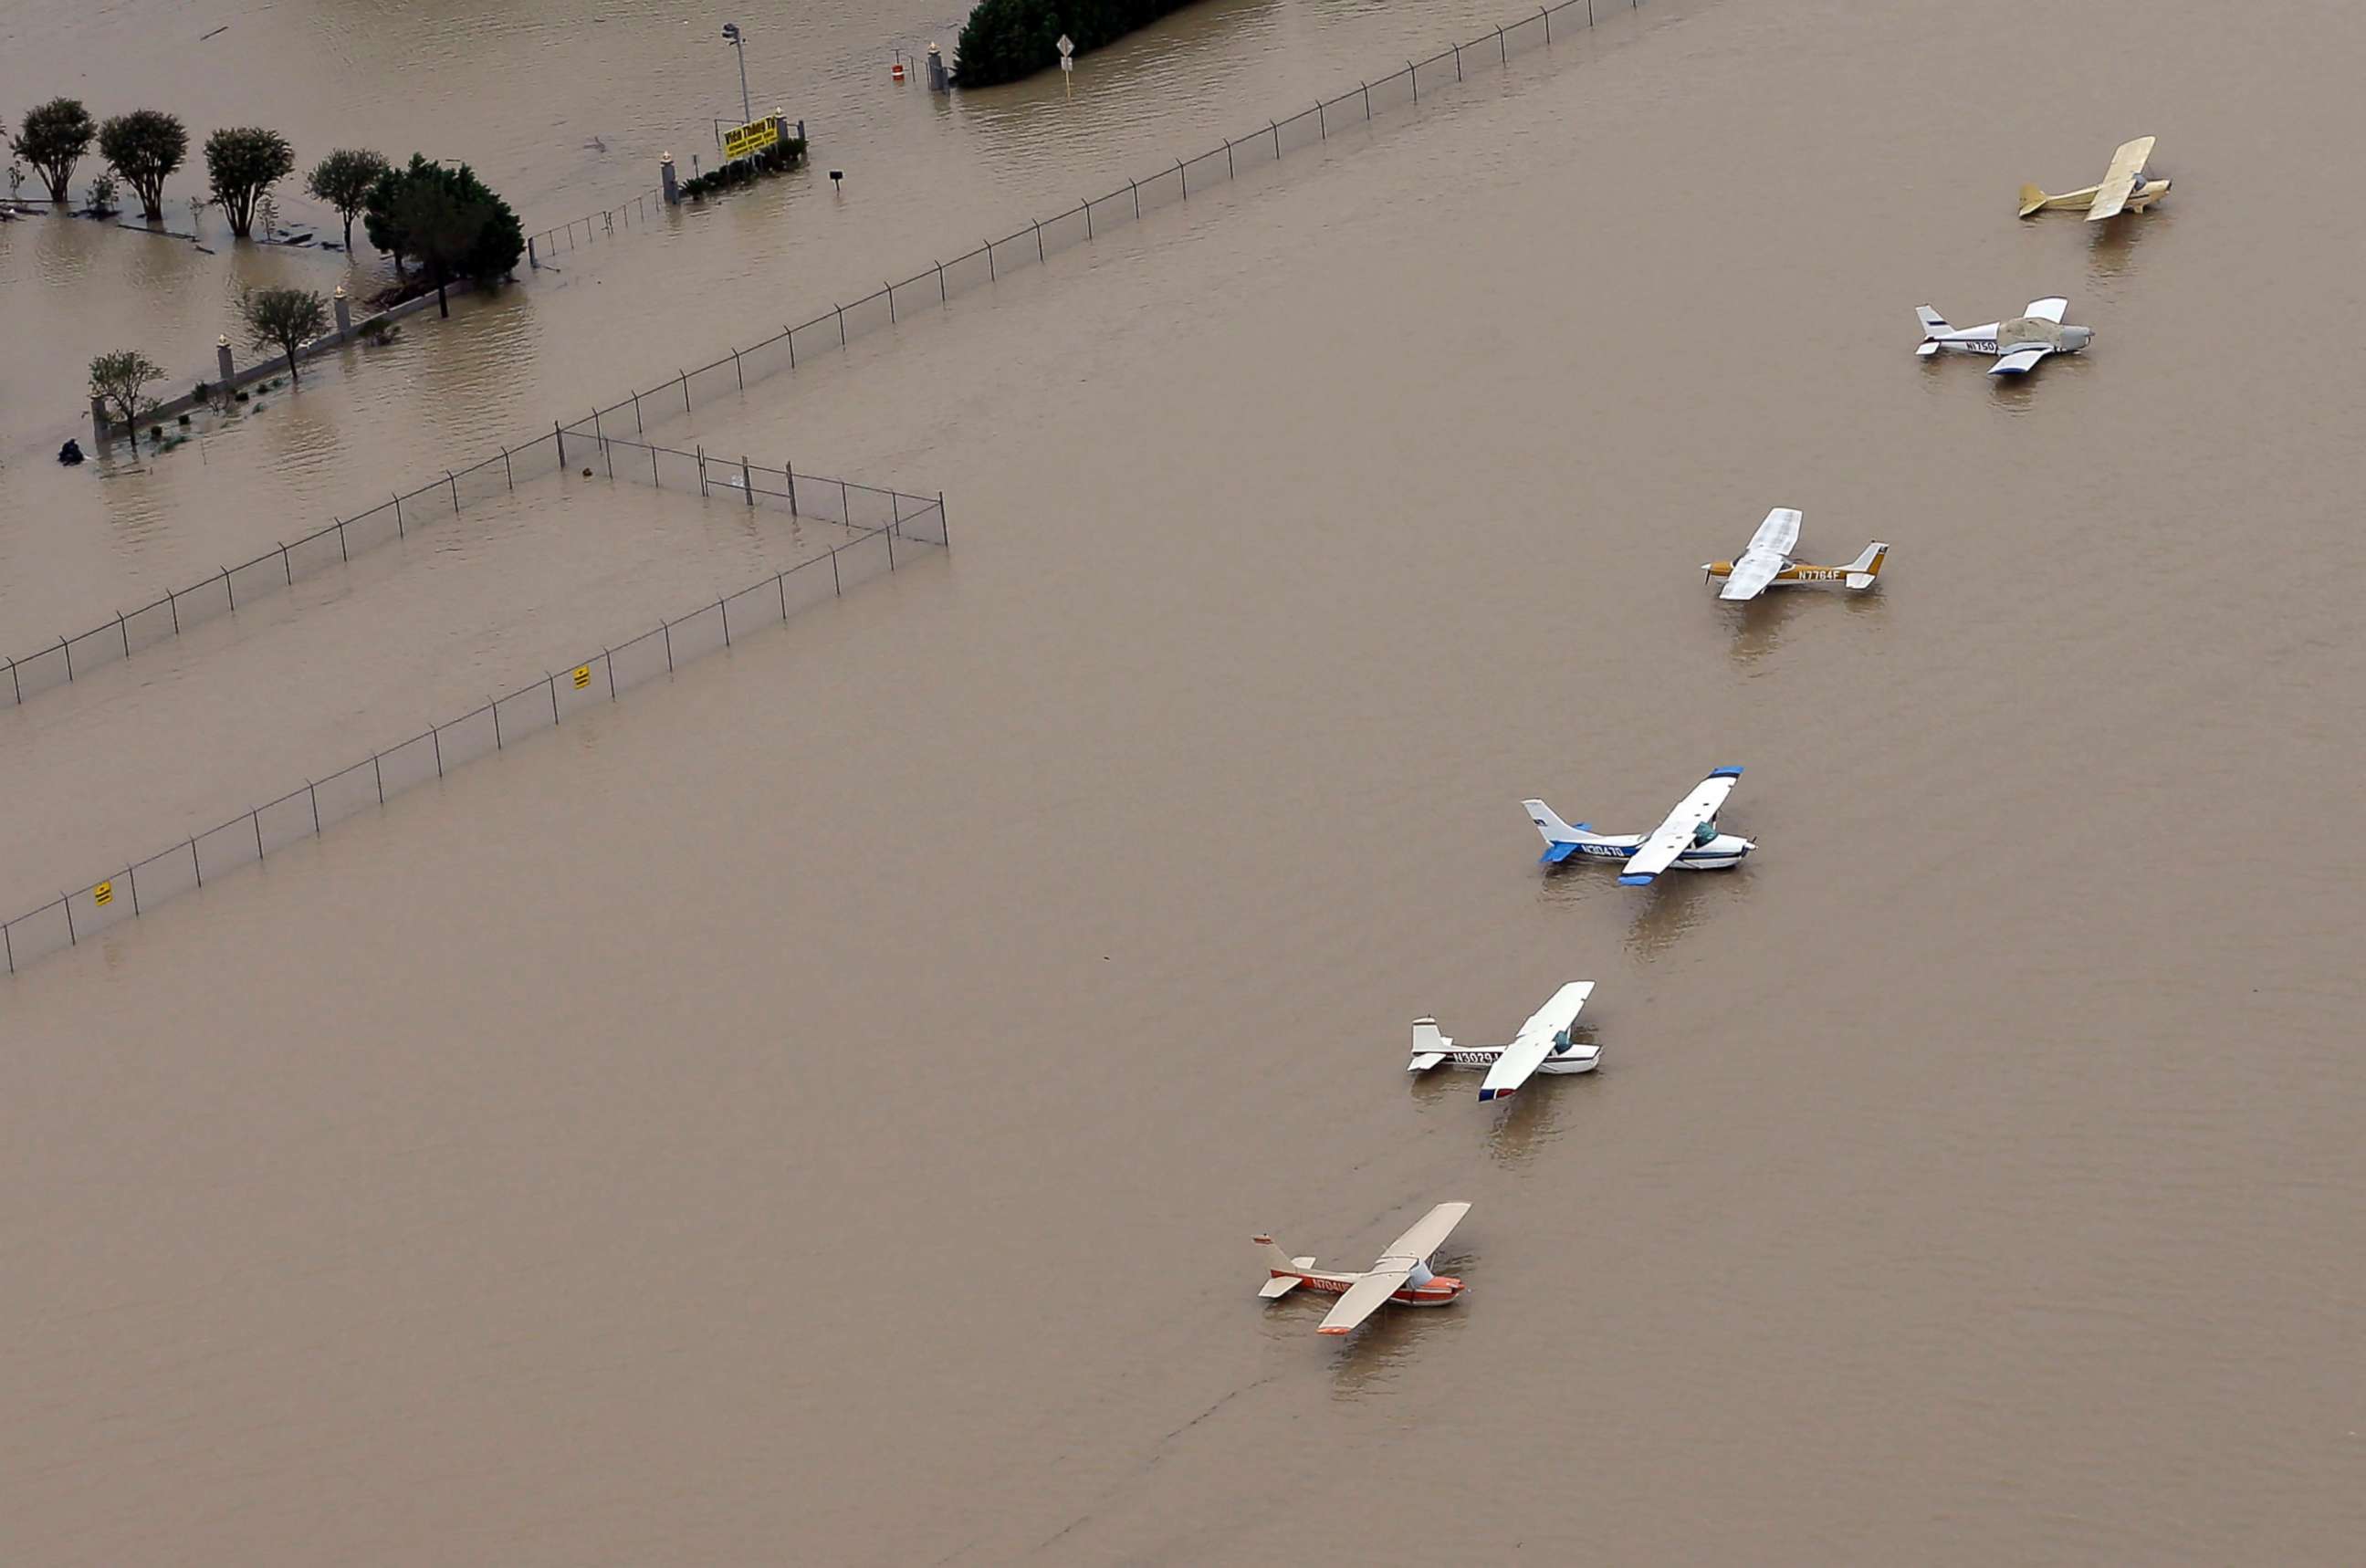 PHOTO: Airplanes sit at a flooded airport near the Addicks Reservoir as floodwaters from Tropical Storm Harvey rise, Aug. 29, 2017, in Houston, Texas.